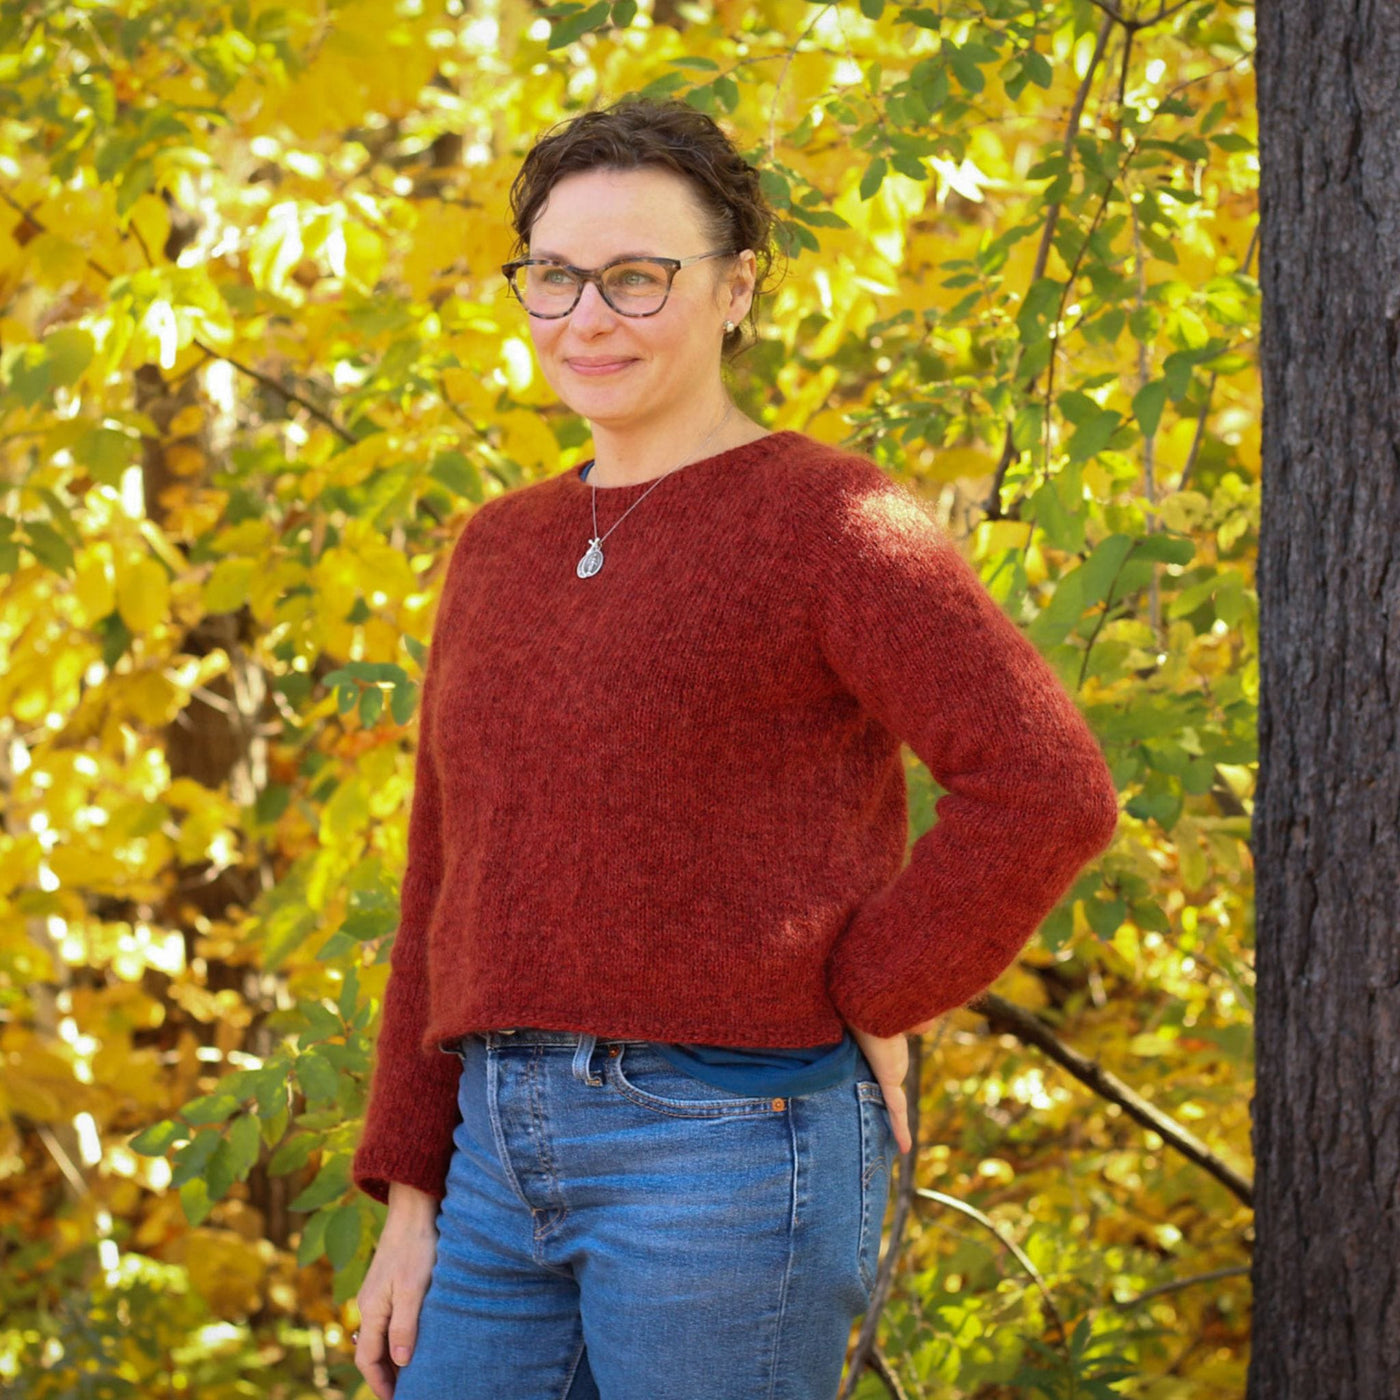 Model standing outside in front of yellow foliage. She is wearing jeans and The Woolly Thistle Vanilla Fluff sweater in color Rauma Finullgarn color 4120 and Rauma Plum 174.